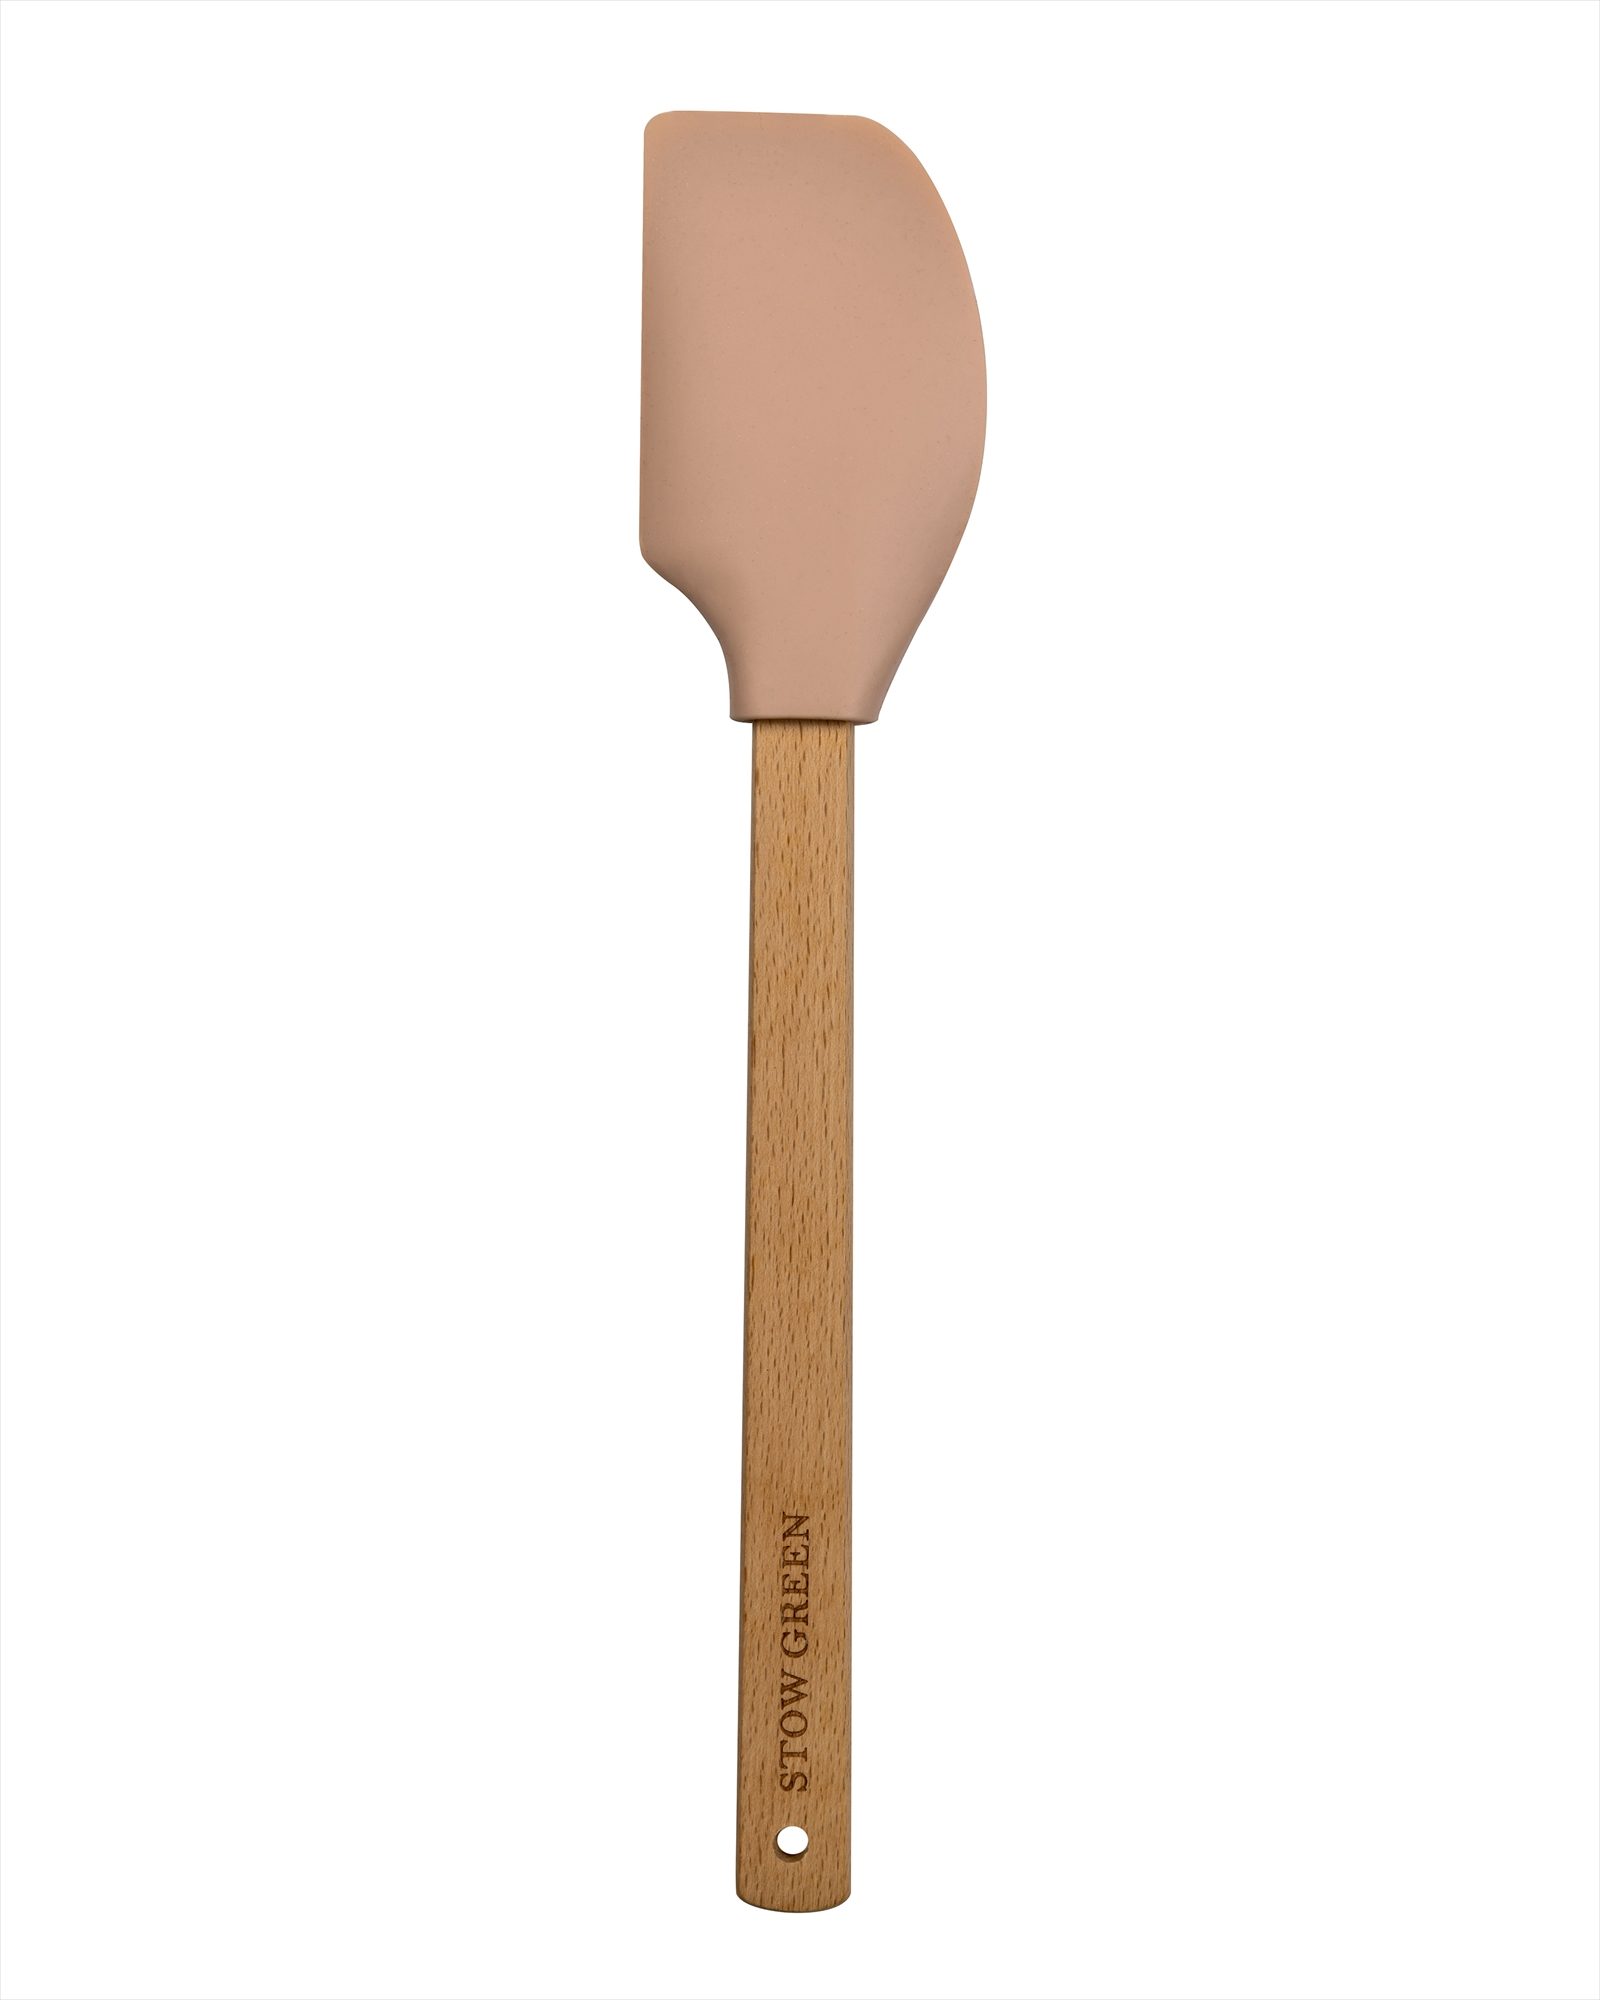 THE PANTRY ROSE PINK SPATULA